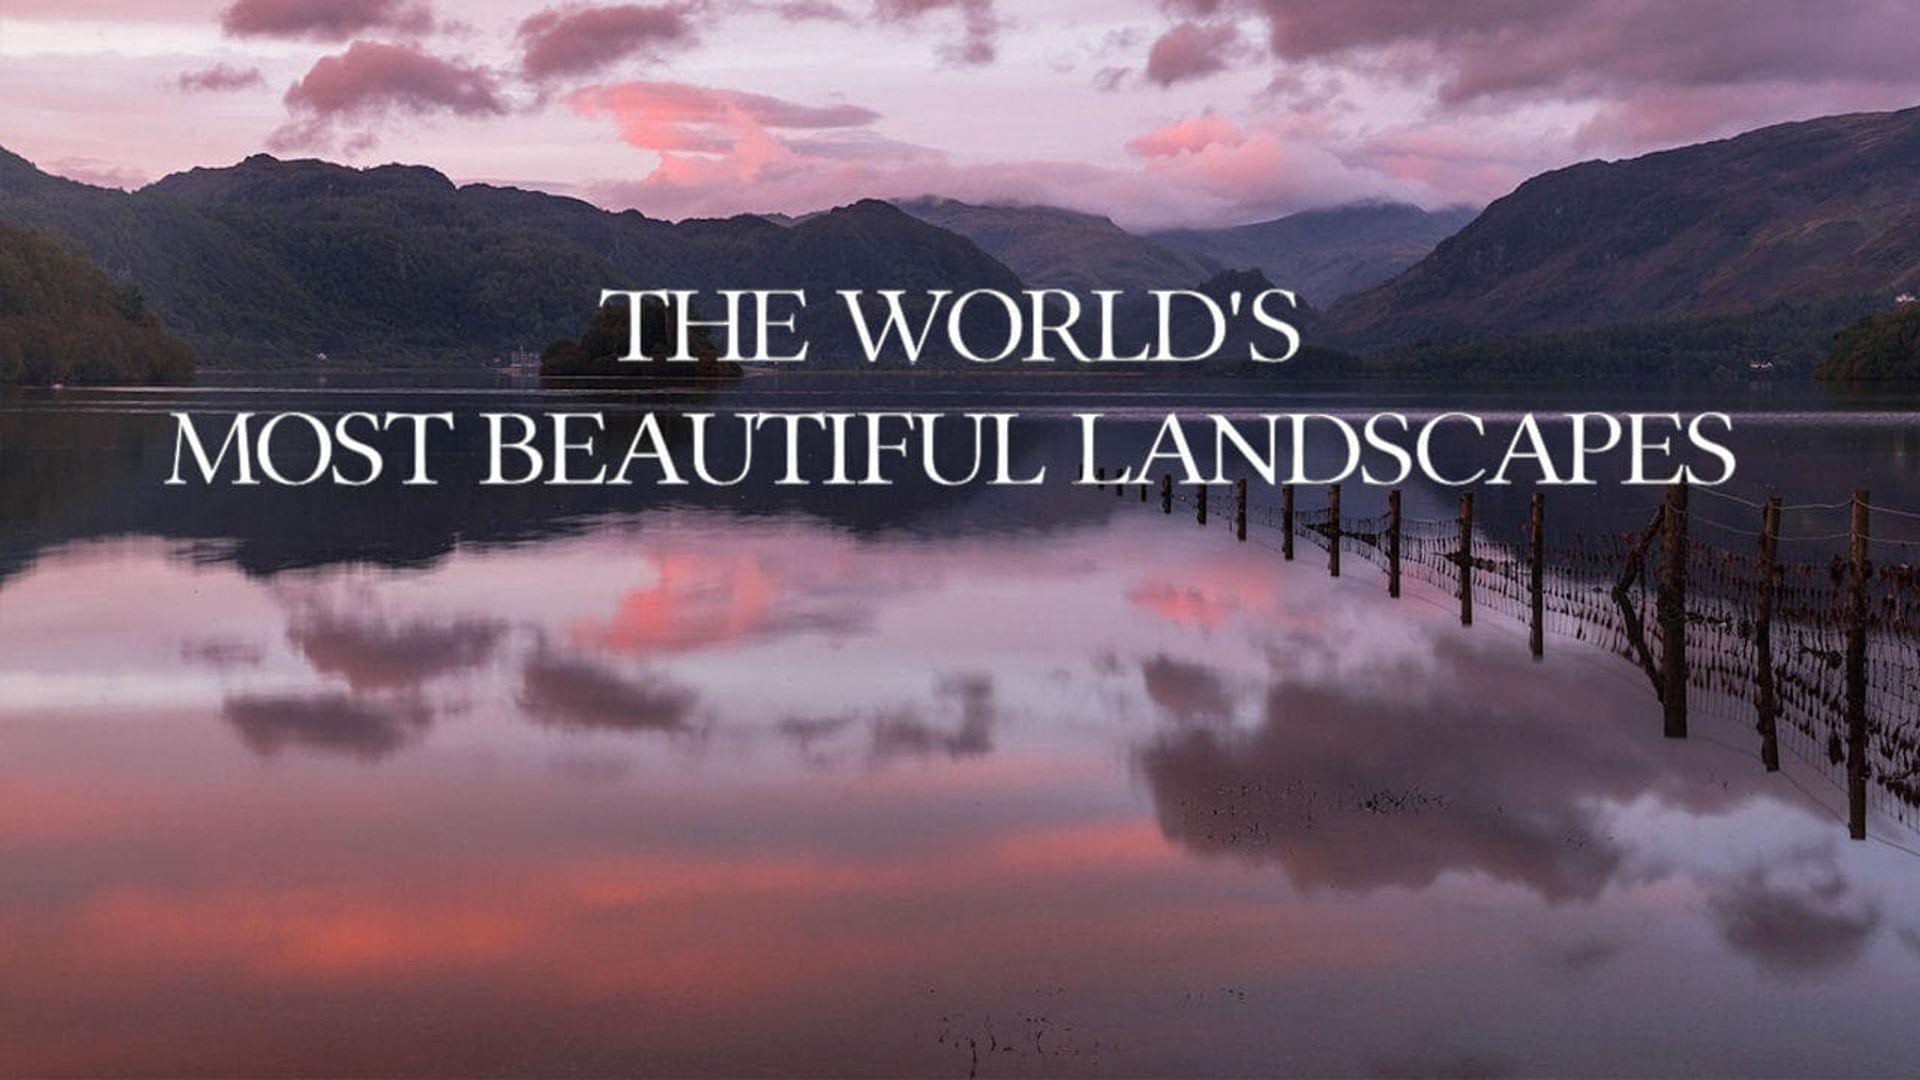 The World's Most Beautiful Landscapes background